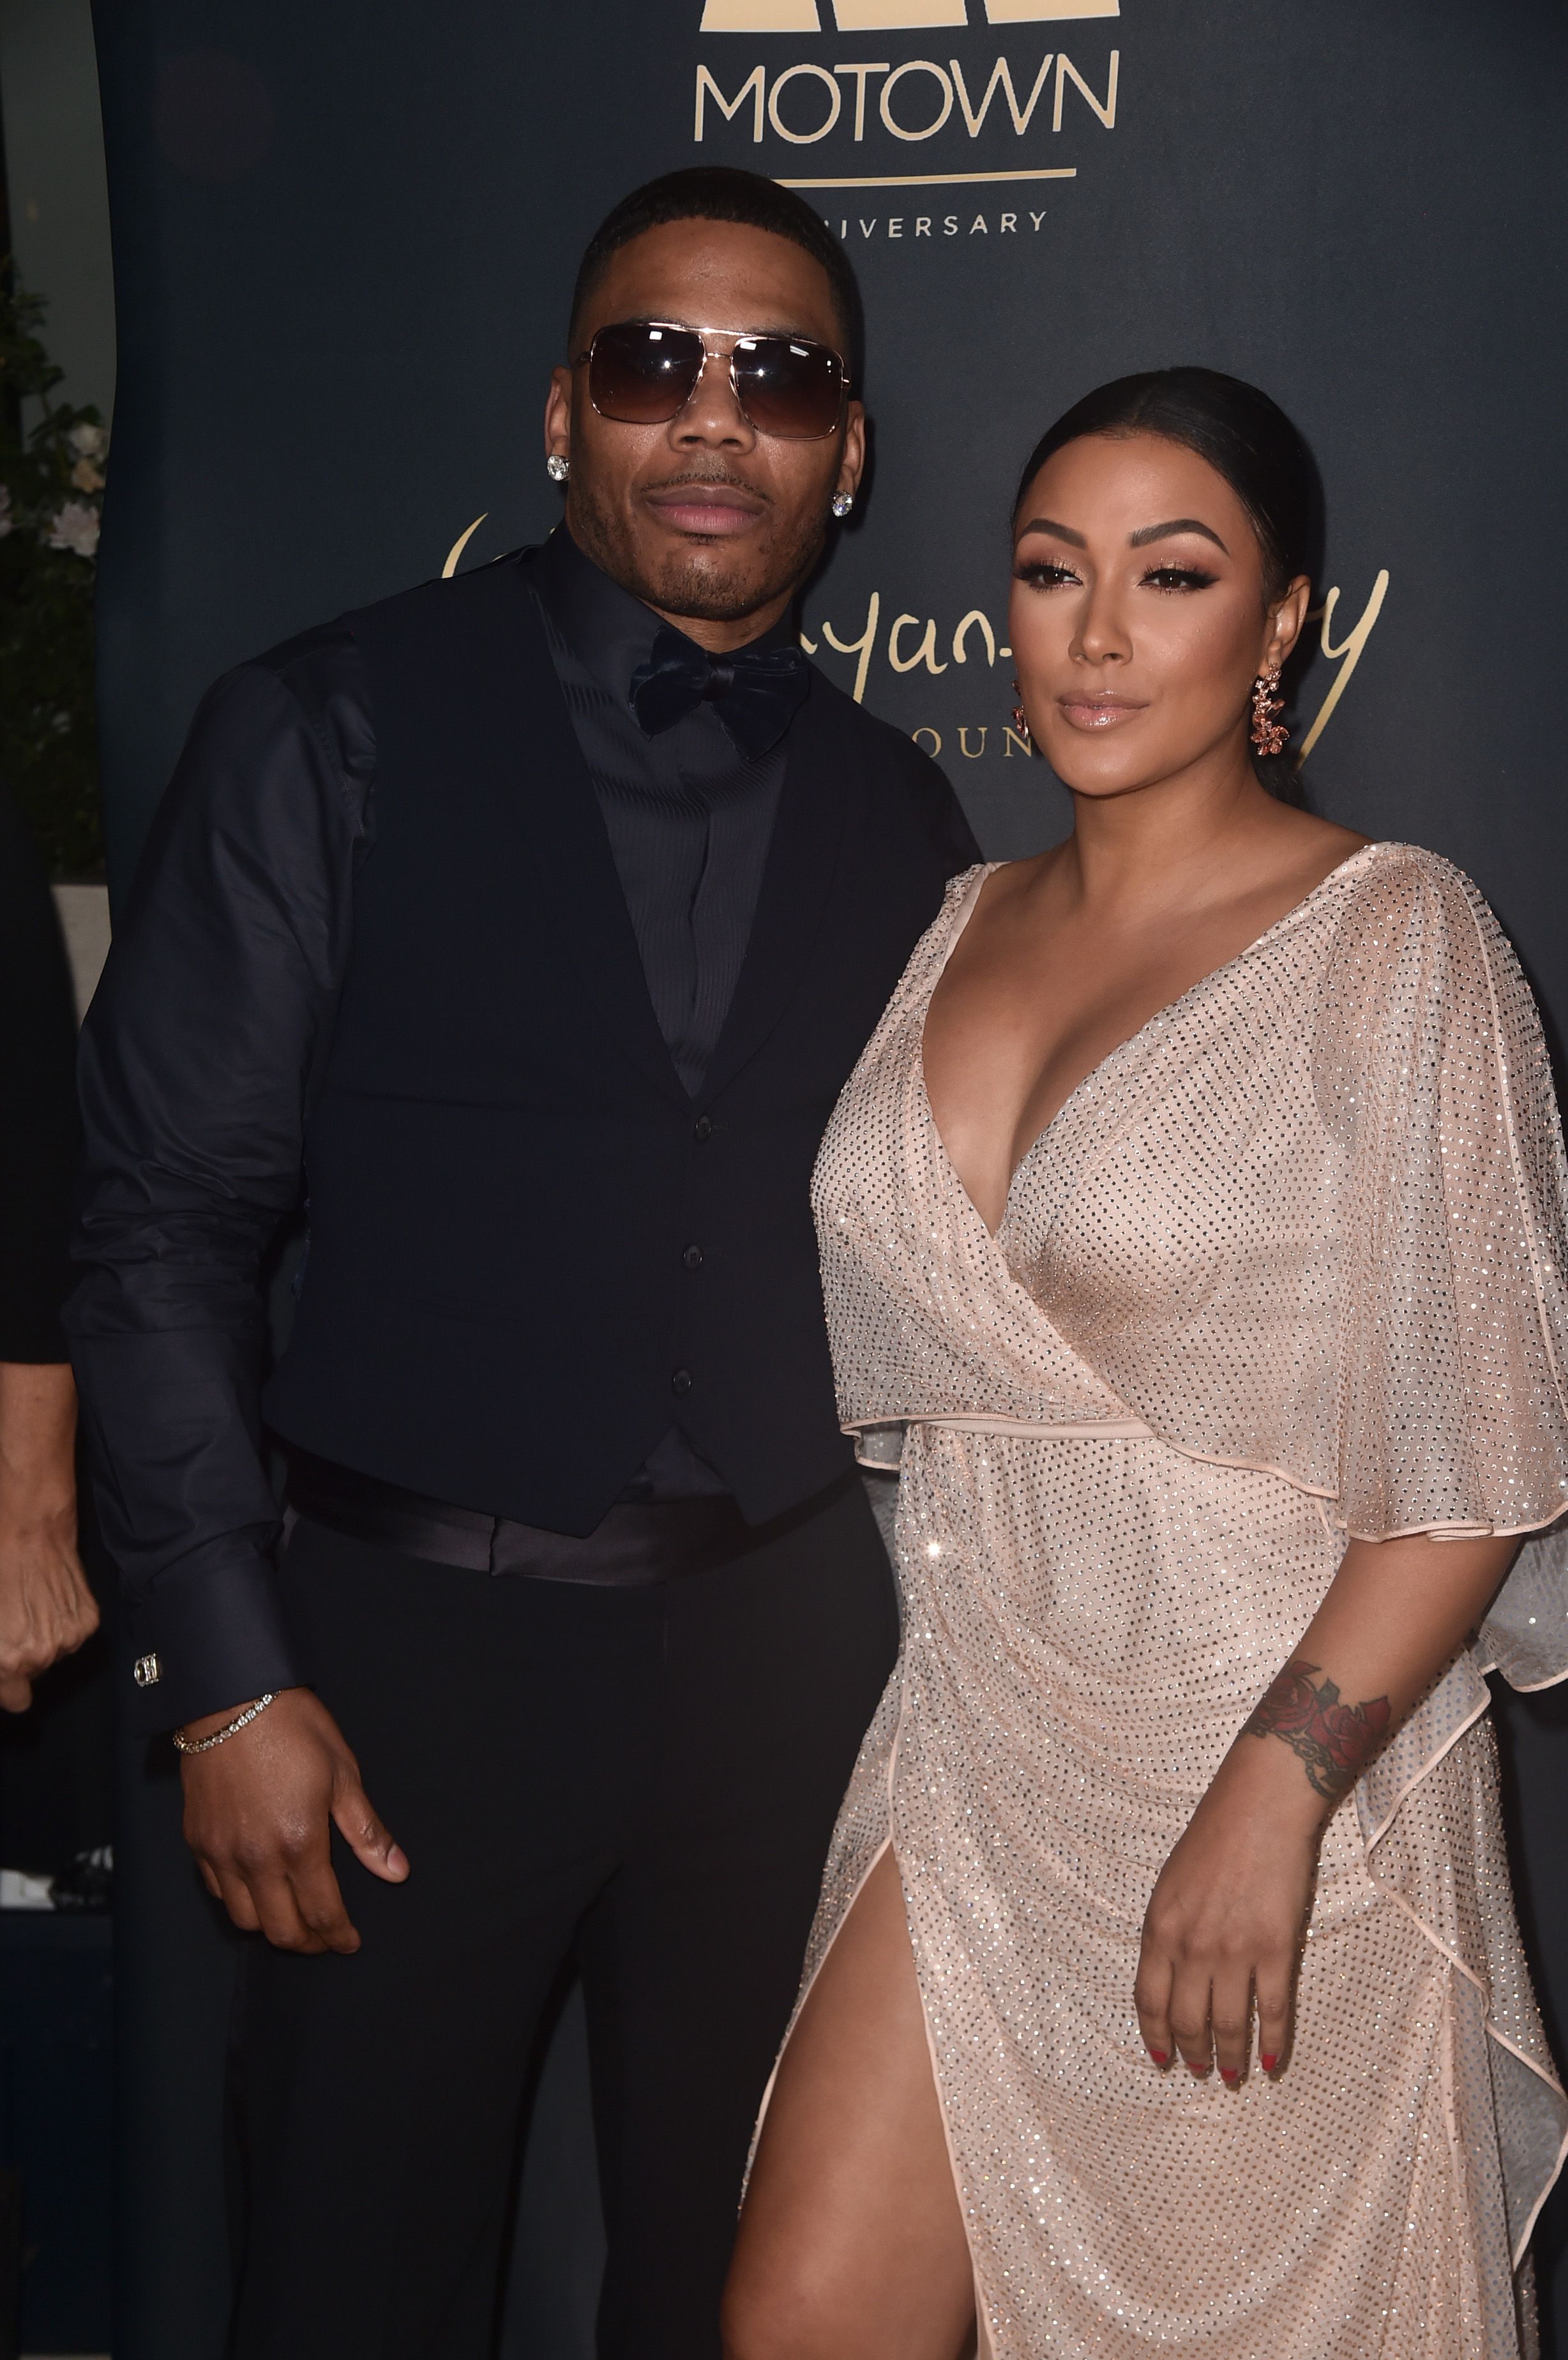 Nelly and Shantel Jackson at the Ryan Gordy Foundation's celebration of 60 Years of Motown at Waldorf Astoria Beverly Hills on November 11, 2019. | Photo: Getty Images